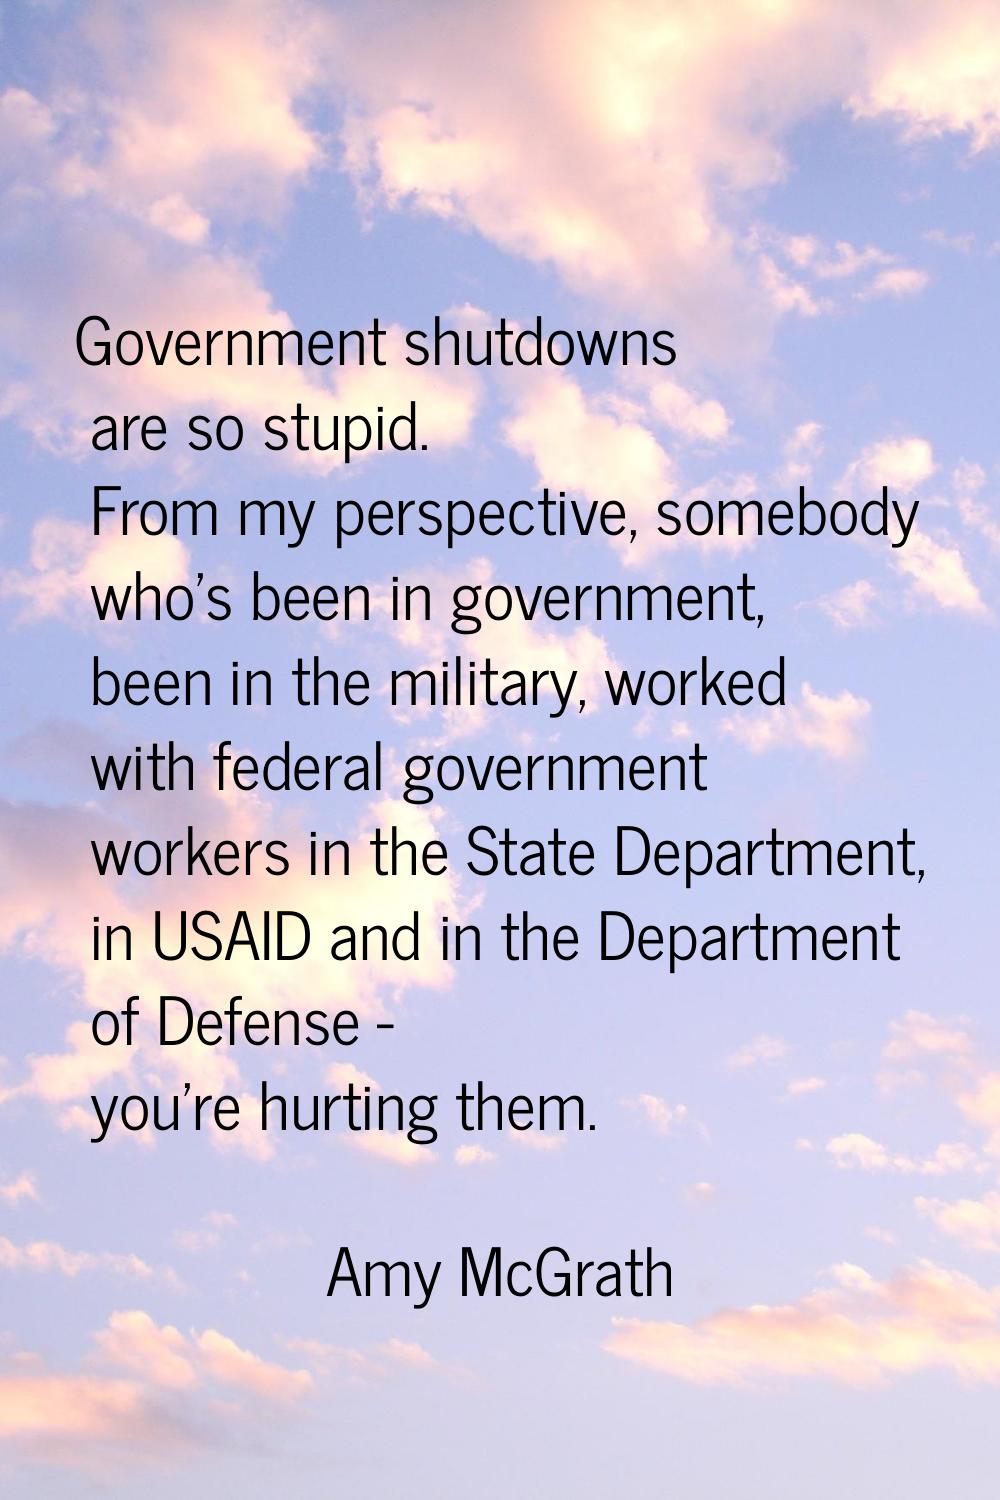 Government shutdowns are so stupid. From my perspective, somebody who's been in government, been in